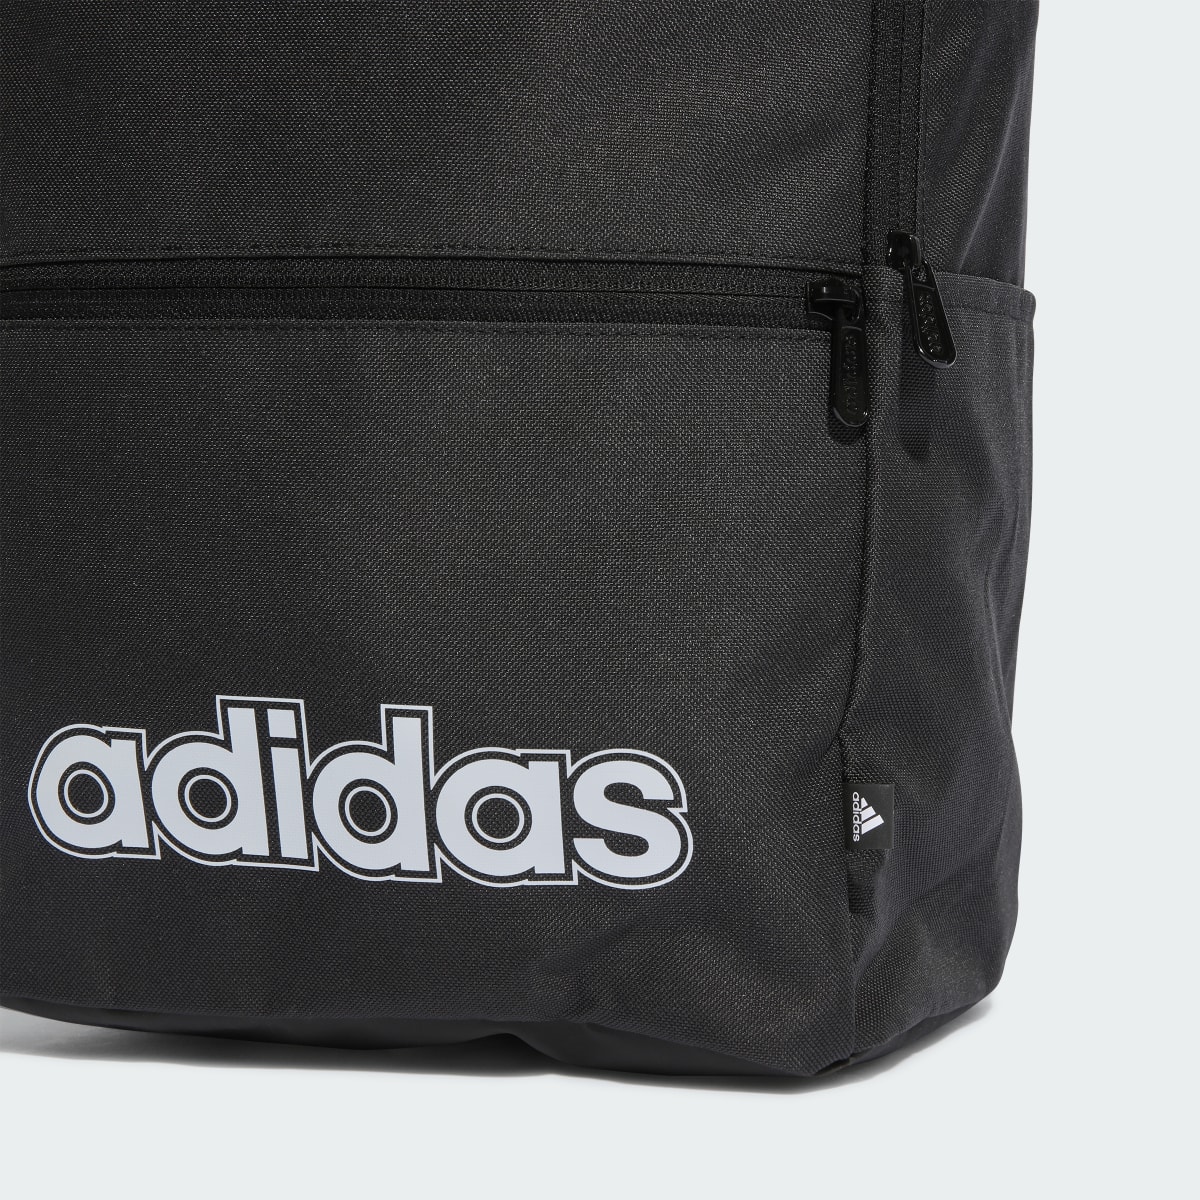 Adidas Classic Foundation Backpack. 7